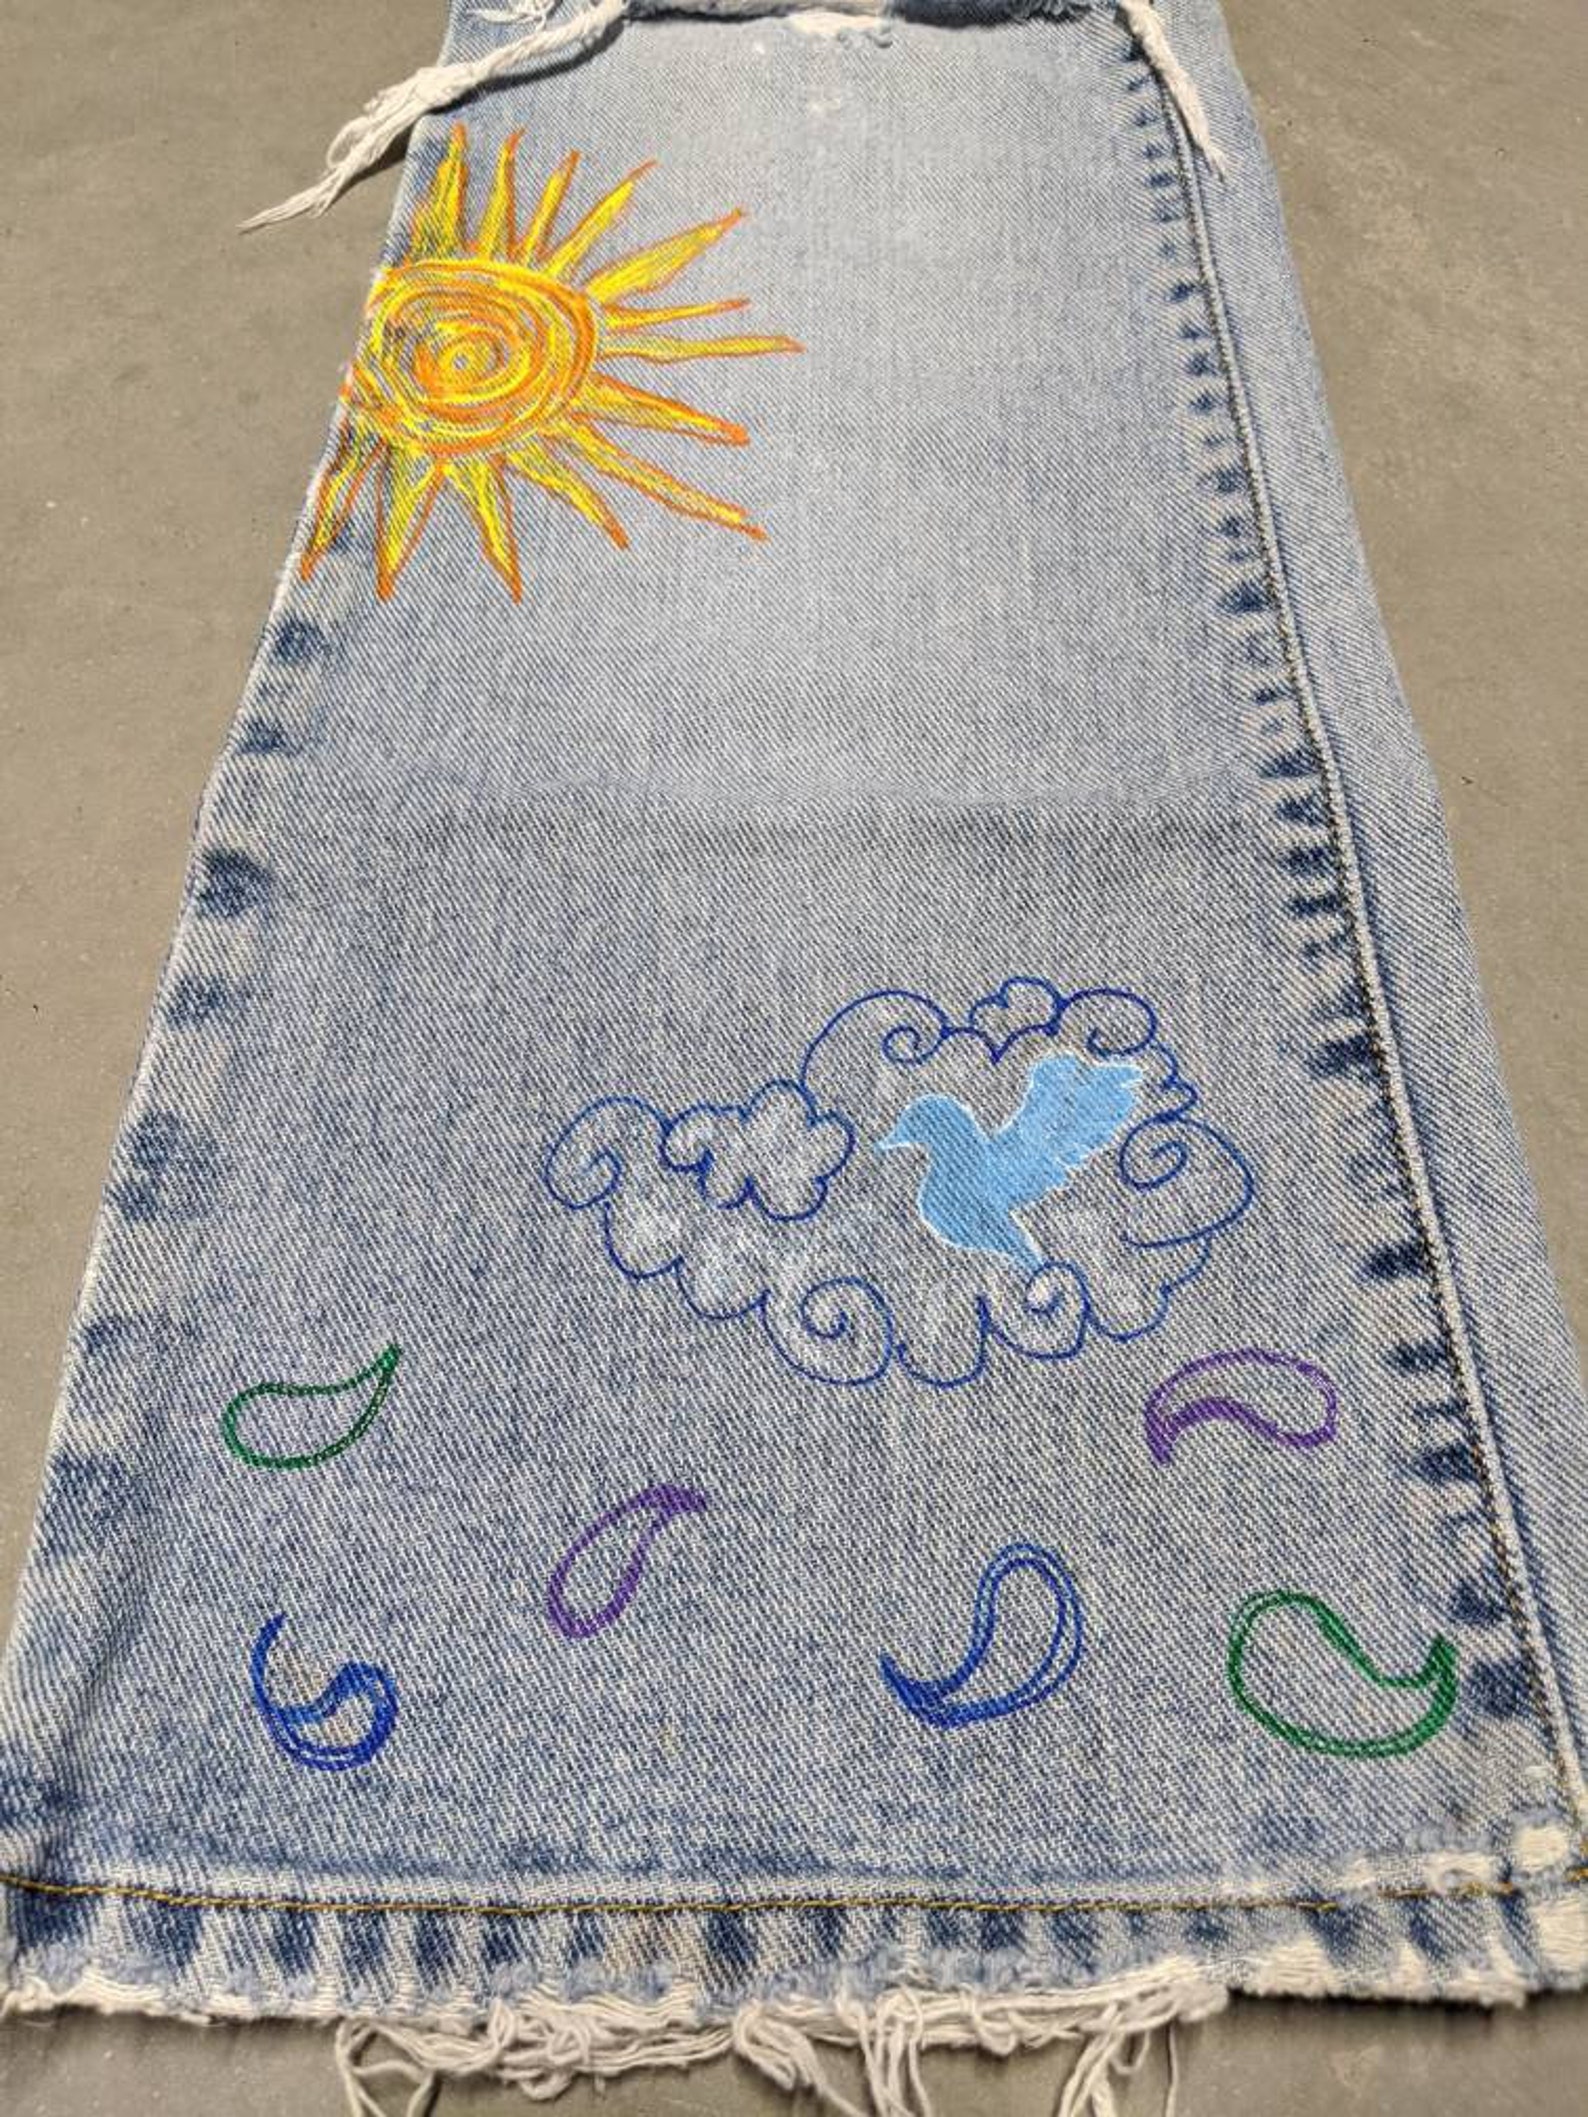 OOAK Hand Painted Jeans Size 4 Distressed Patched Embroidered | Etsy